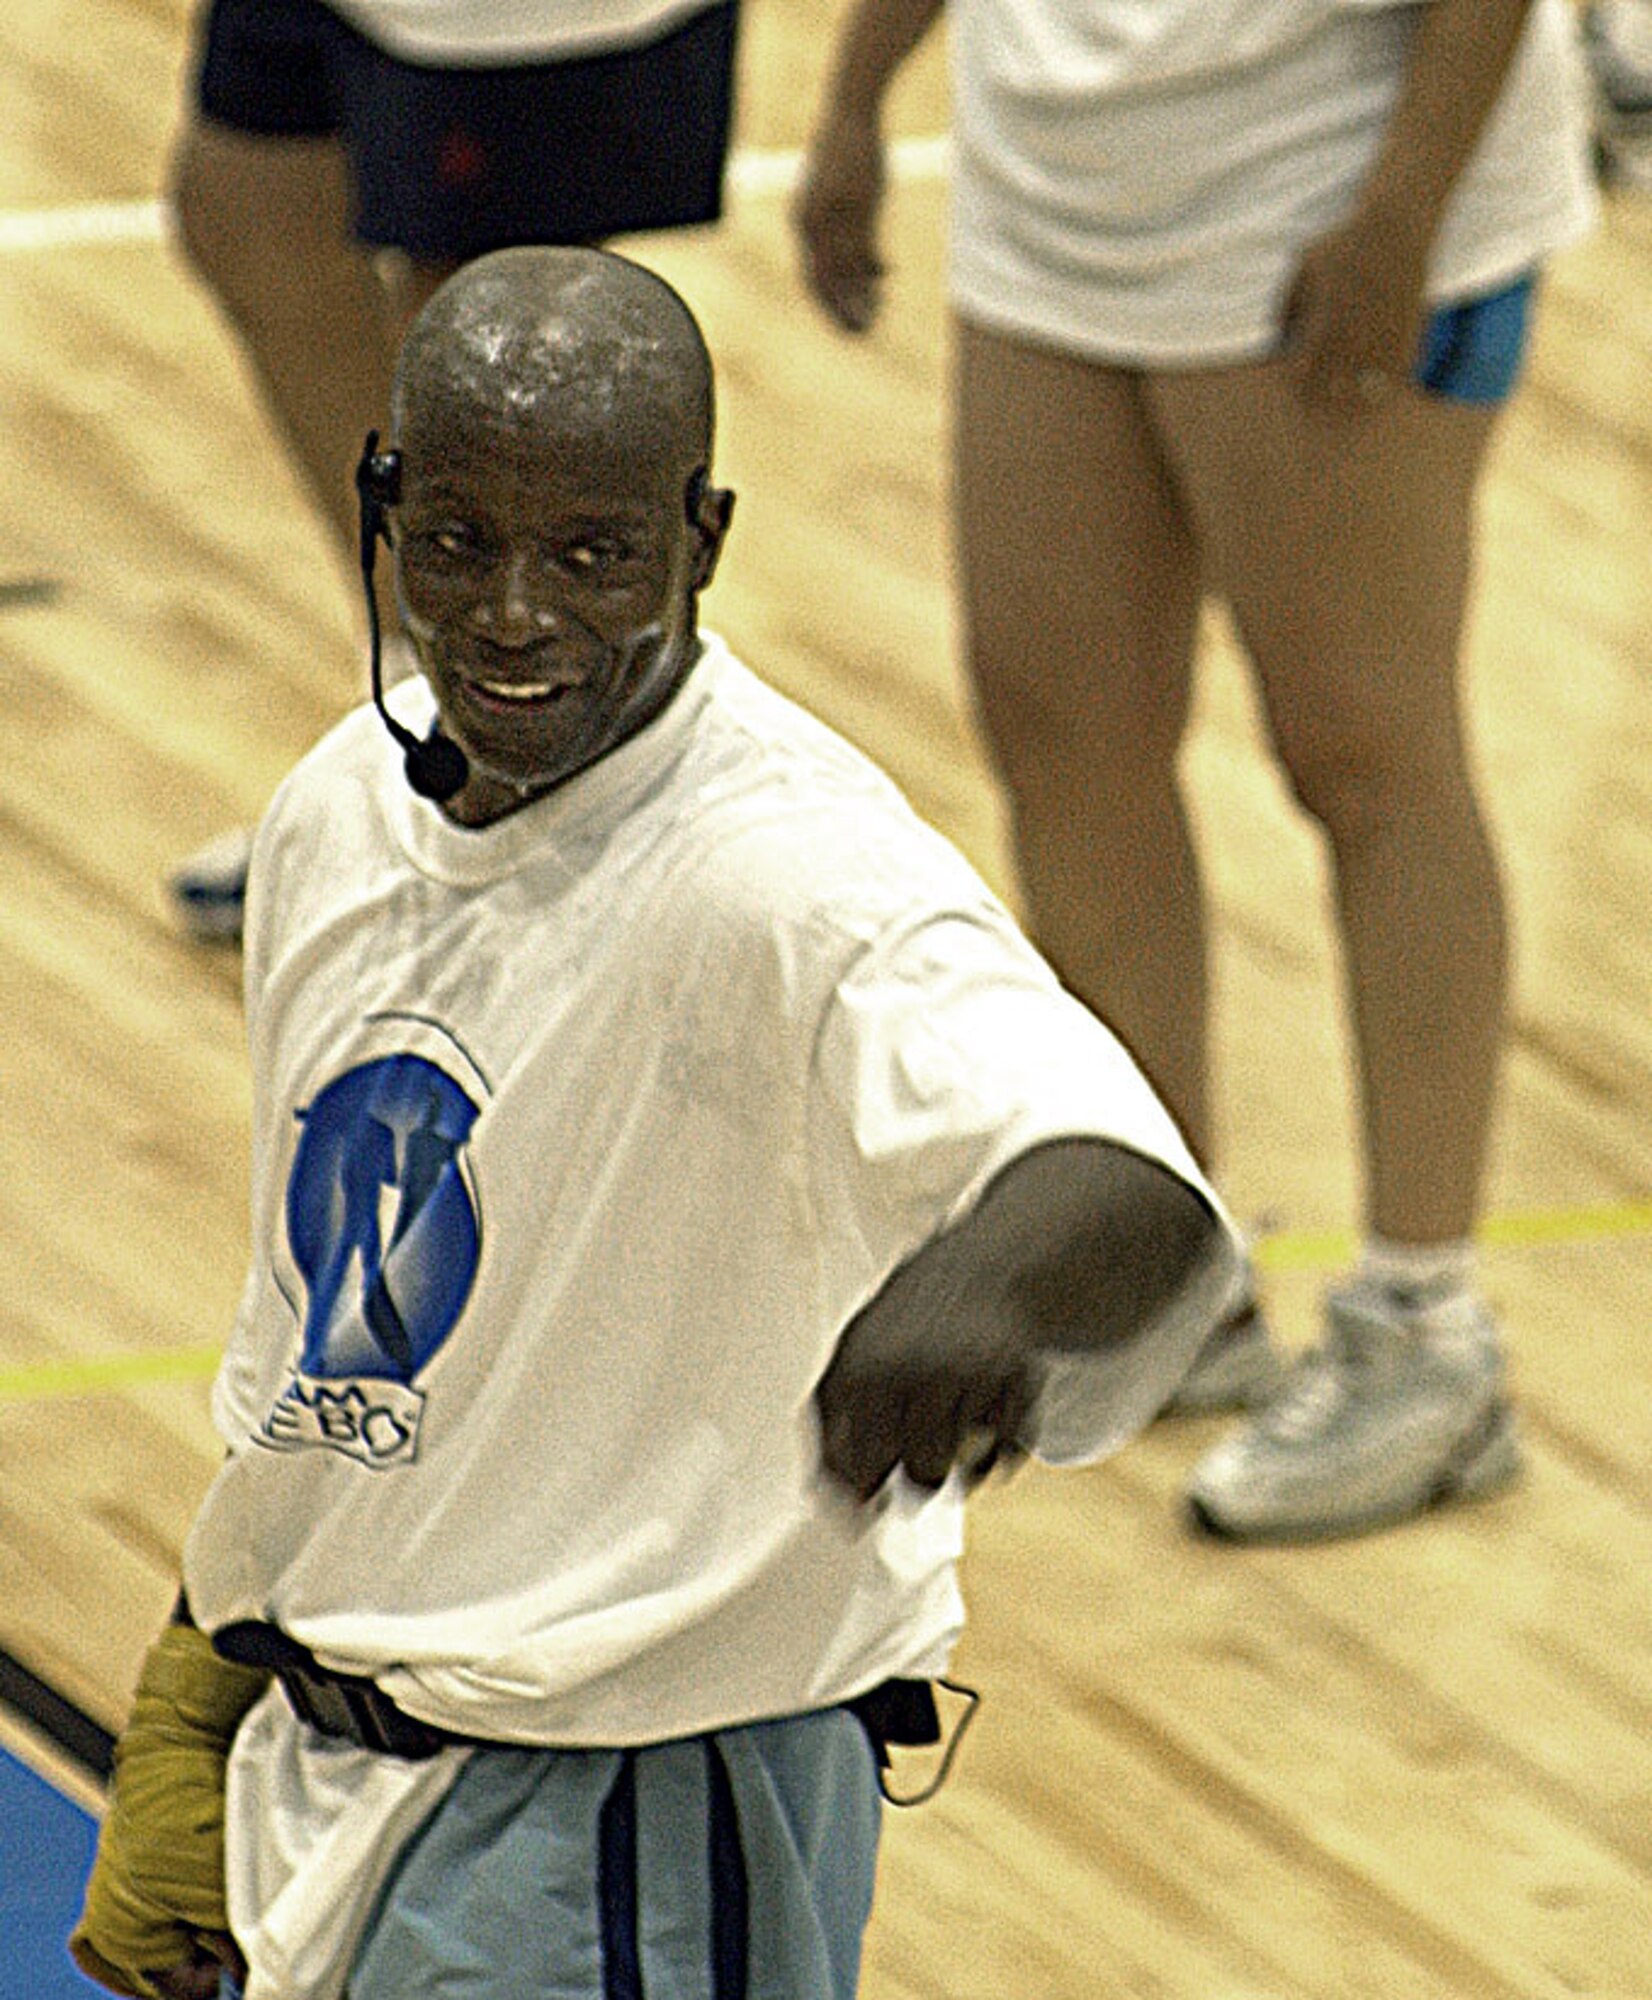 LANGLEY AIR FORCE BASE, Va. -- Tae Bo creator Billy Blanks stretches out with a gym full of students on opening night of Langley's new fitness center Nov. 7.  Blanks led the class of more than 500 in his unique mix of dance, aerobic and Tae Kwon Do moves.  (U.S. Air Force photo by Airman Samantha Willner)